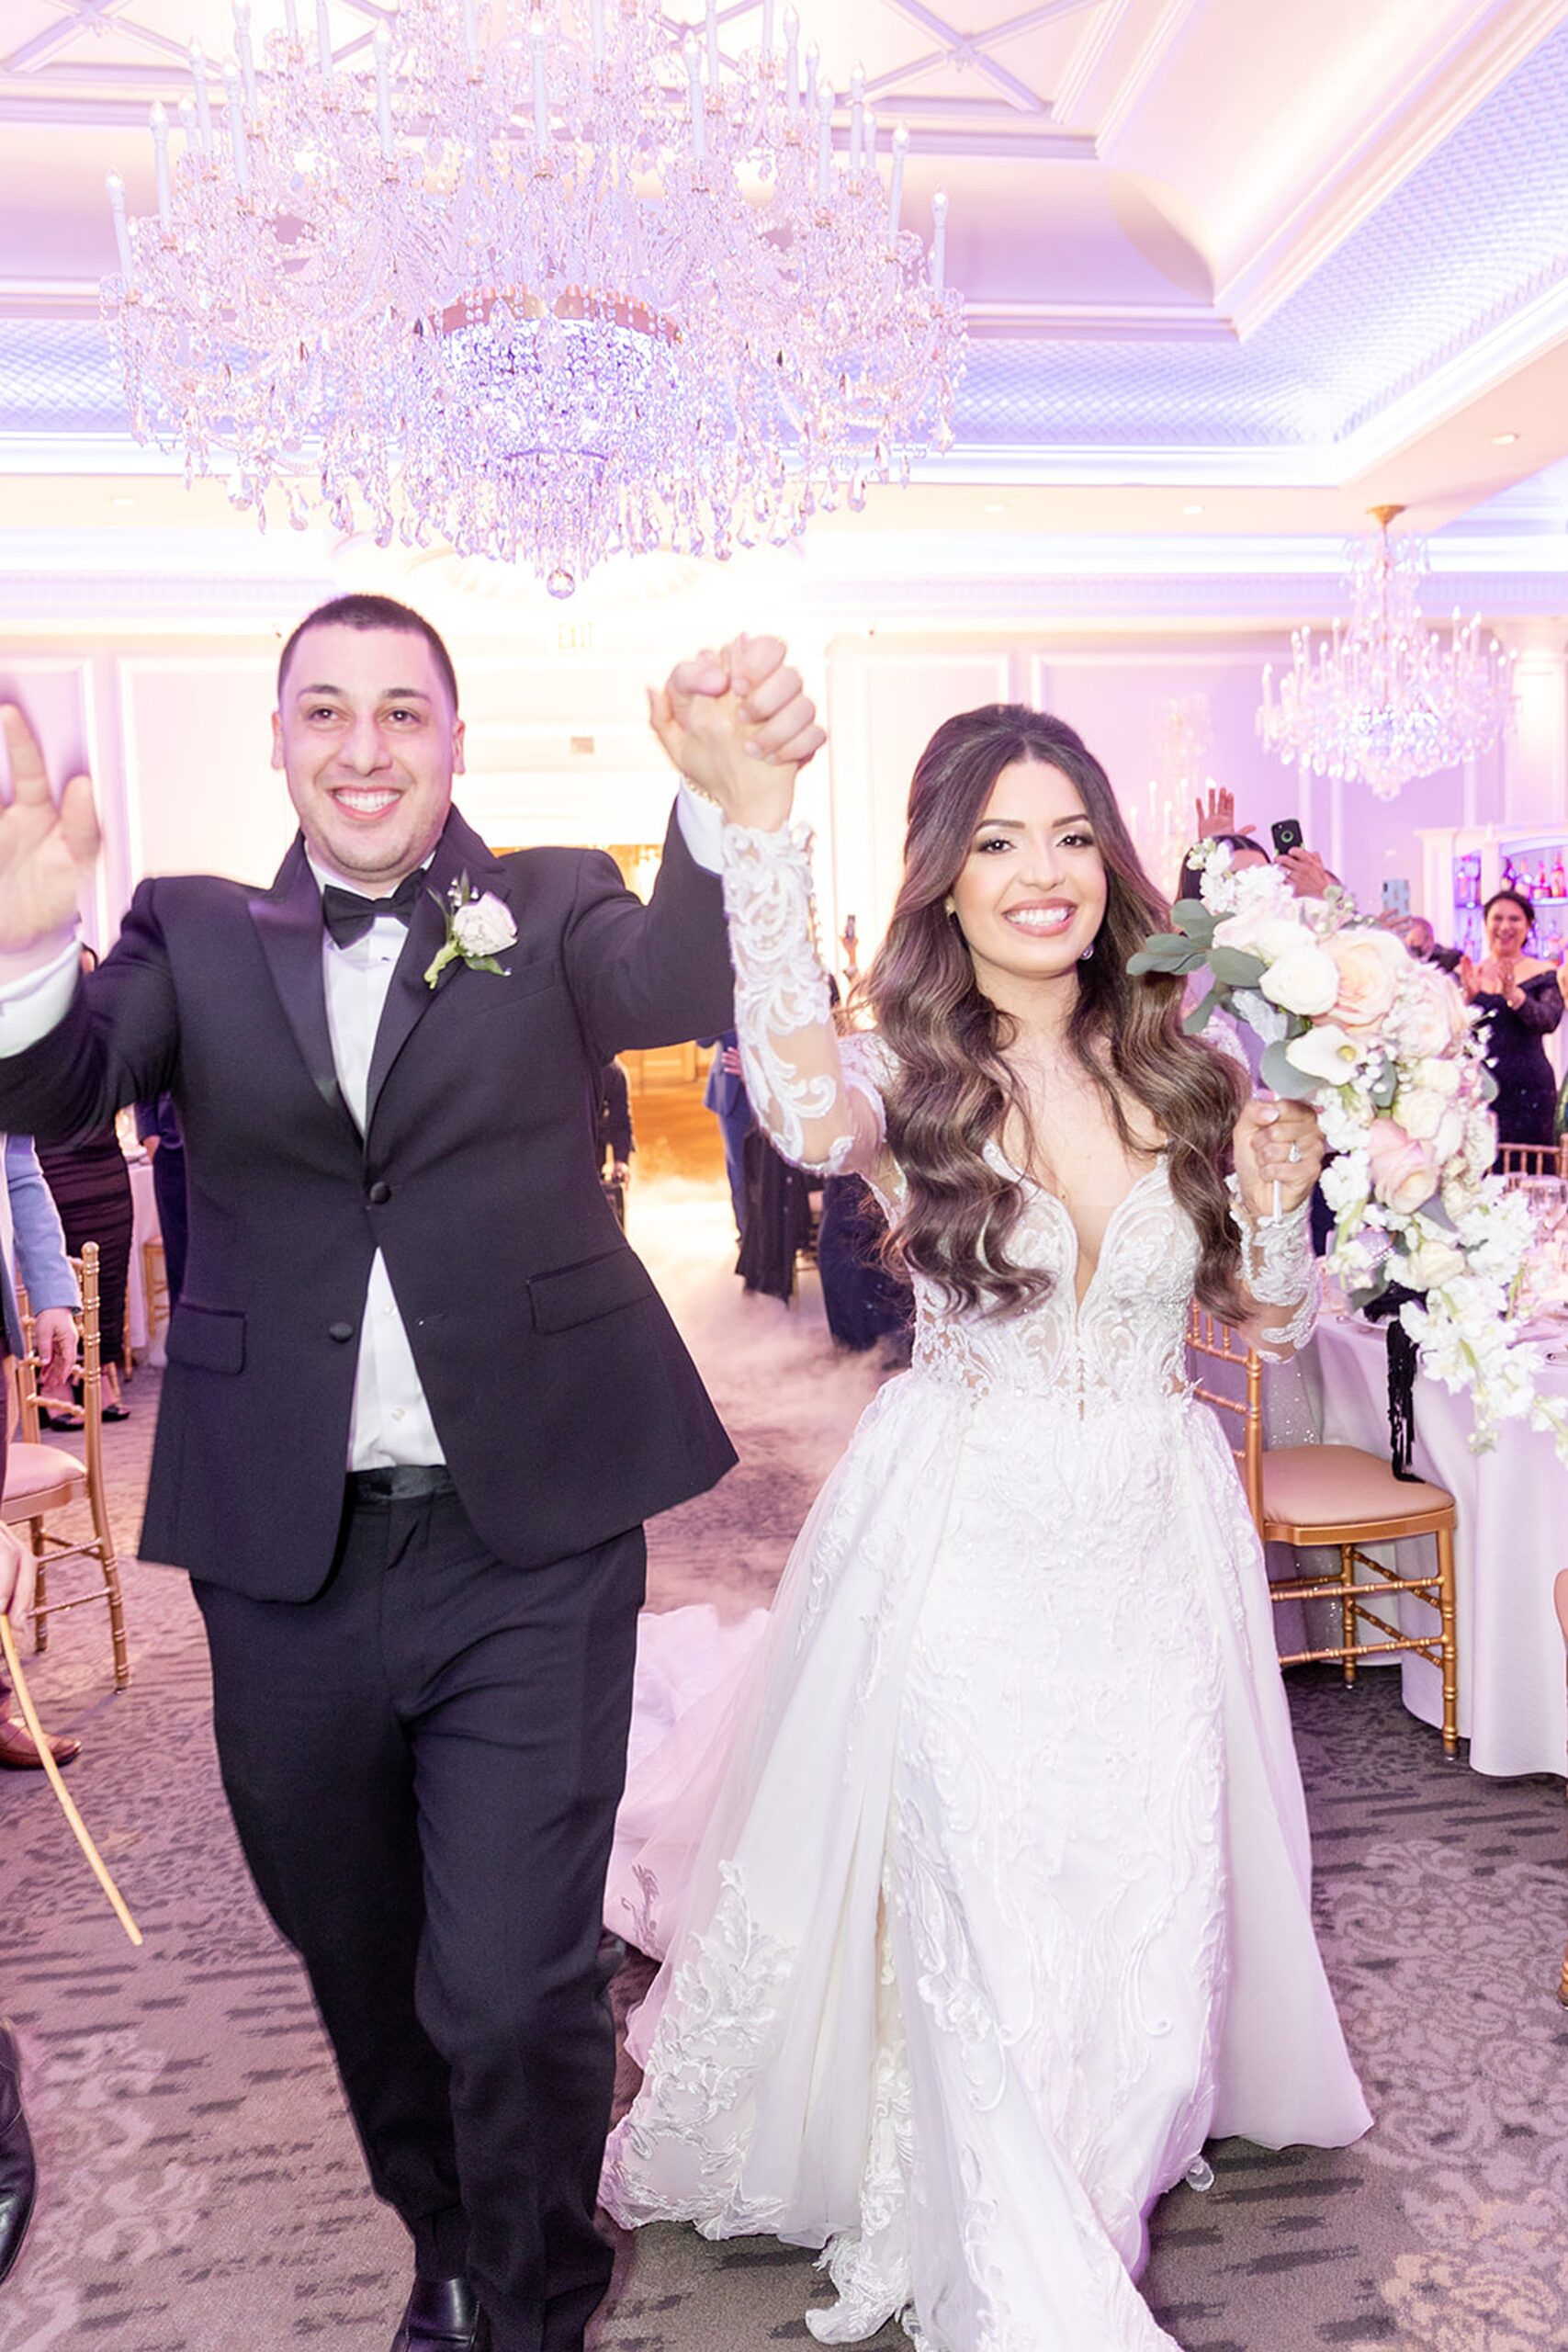 Newlyweds enter their wedding receptions with large crystal chandeliers